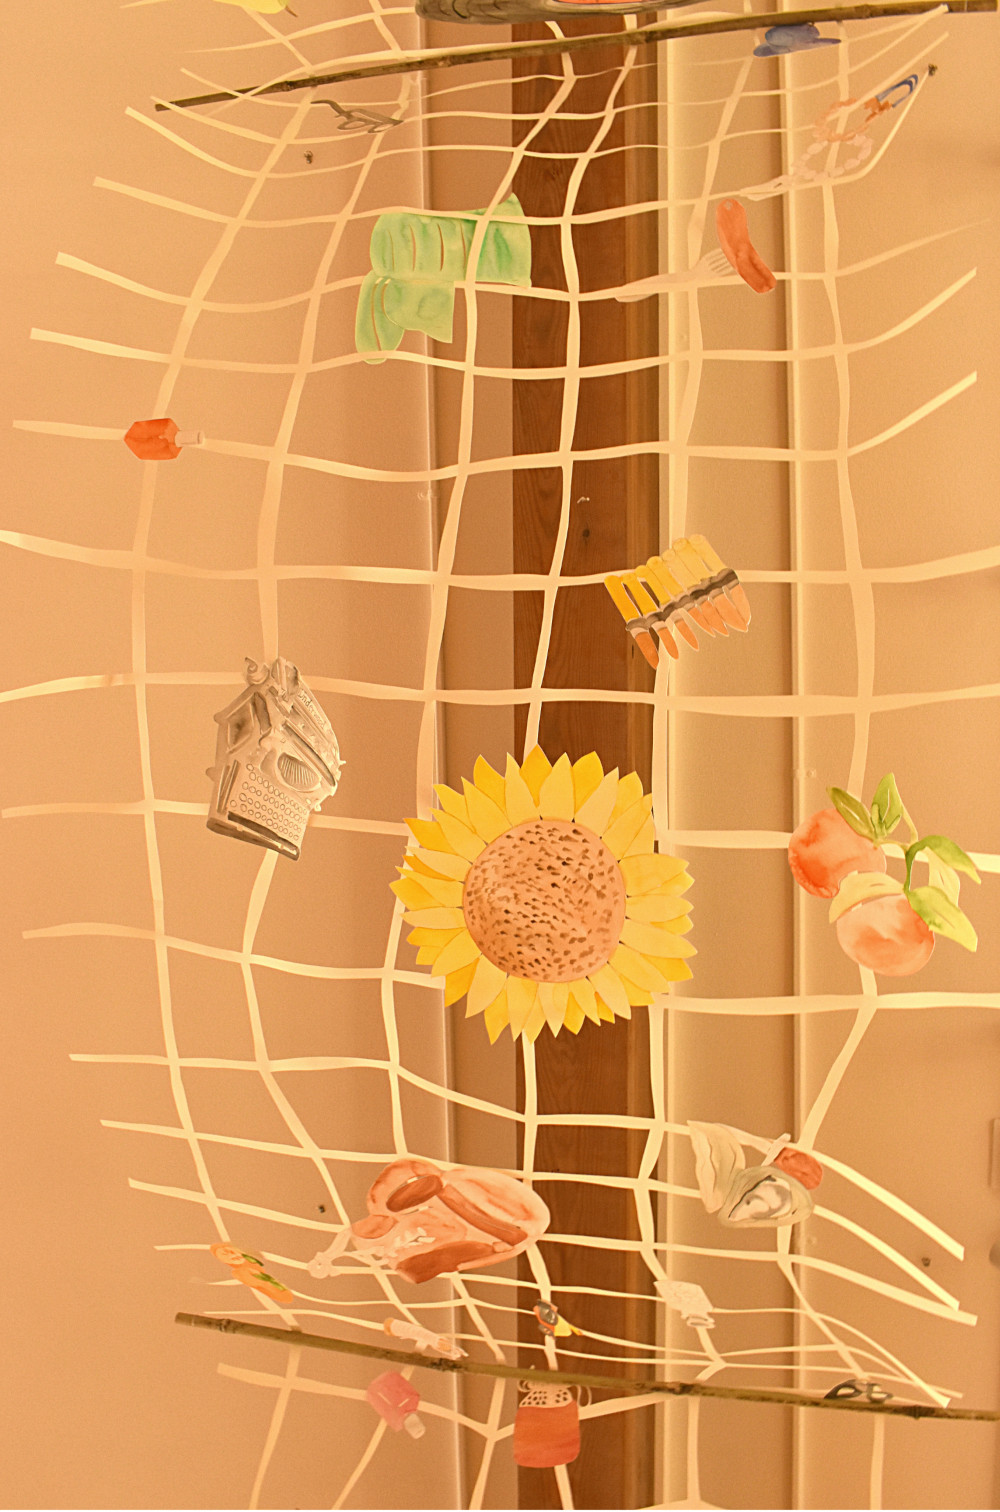 A section of Lauren Iida's memory net. Objects shown include Buddhist prayer beads, a hotdog on a fork, machine gun bullets, a bottle of nail polish, a typewriter, a sunflower, boxing gloves, and fruit.